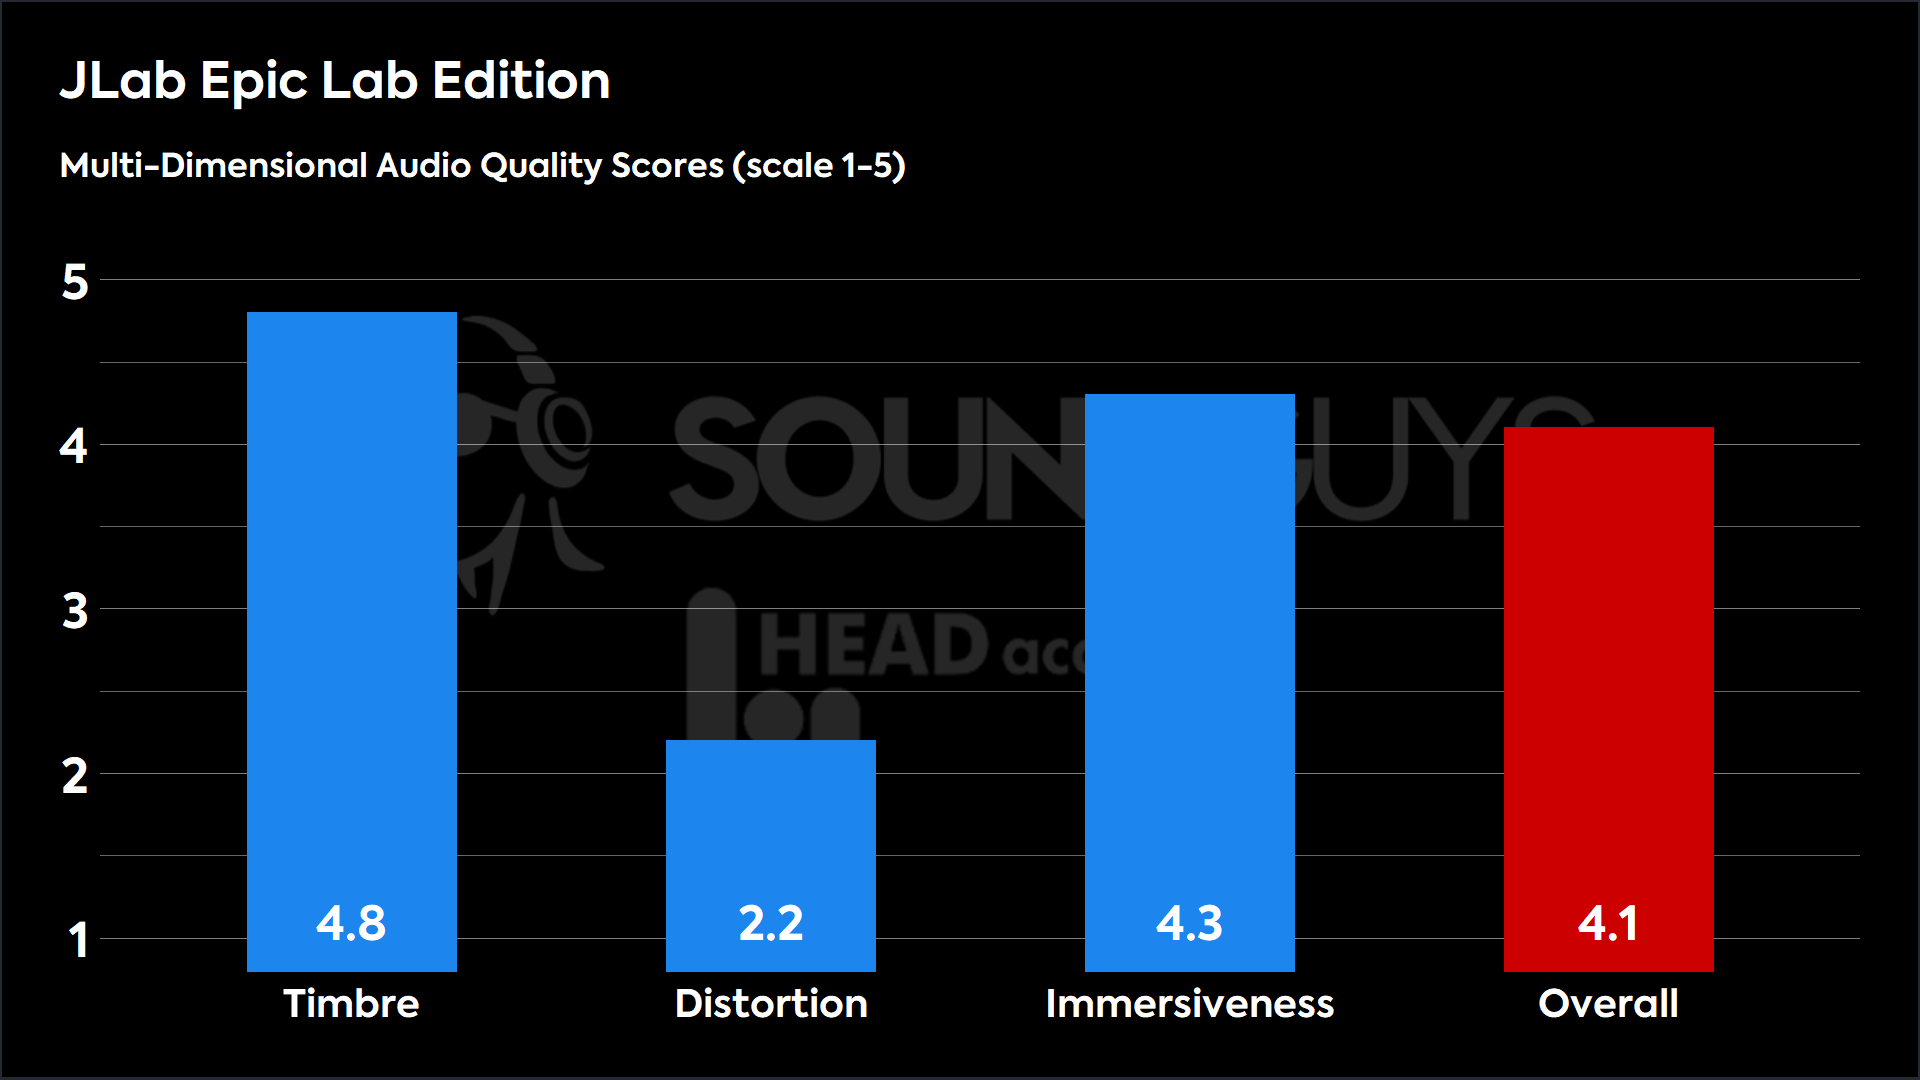 This chart shows the MDAQS results for the JLab Epic Lab Edition in Default mode. The Timbre score is 4.8, The Distortion score is 2.2, the Immersiveness score is 4.3, and the Overall Score is 4.1).